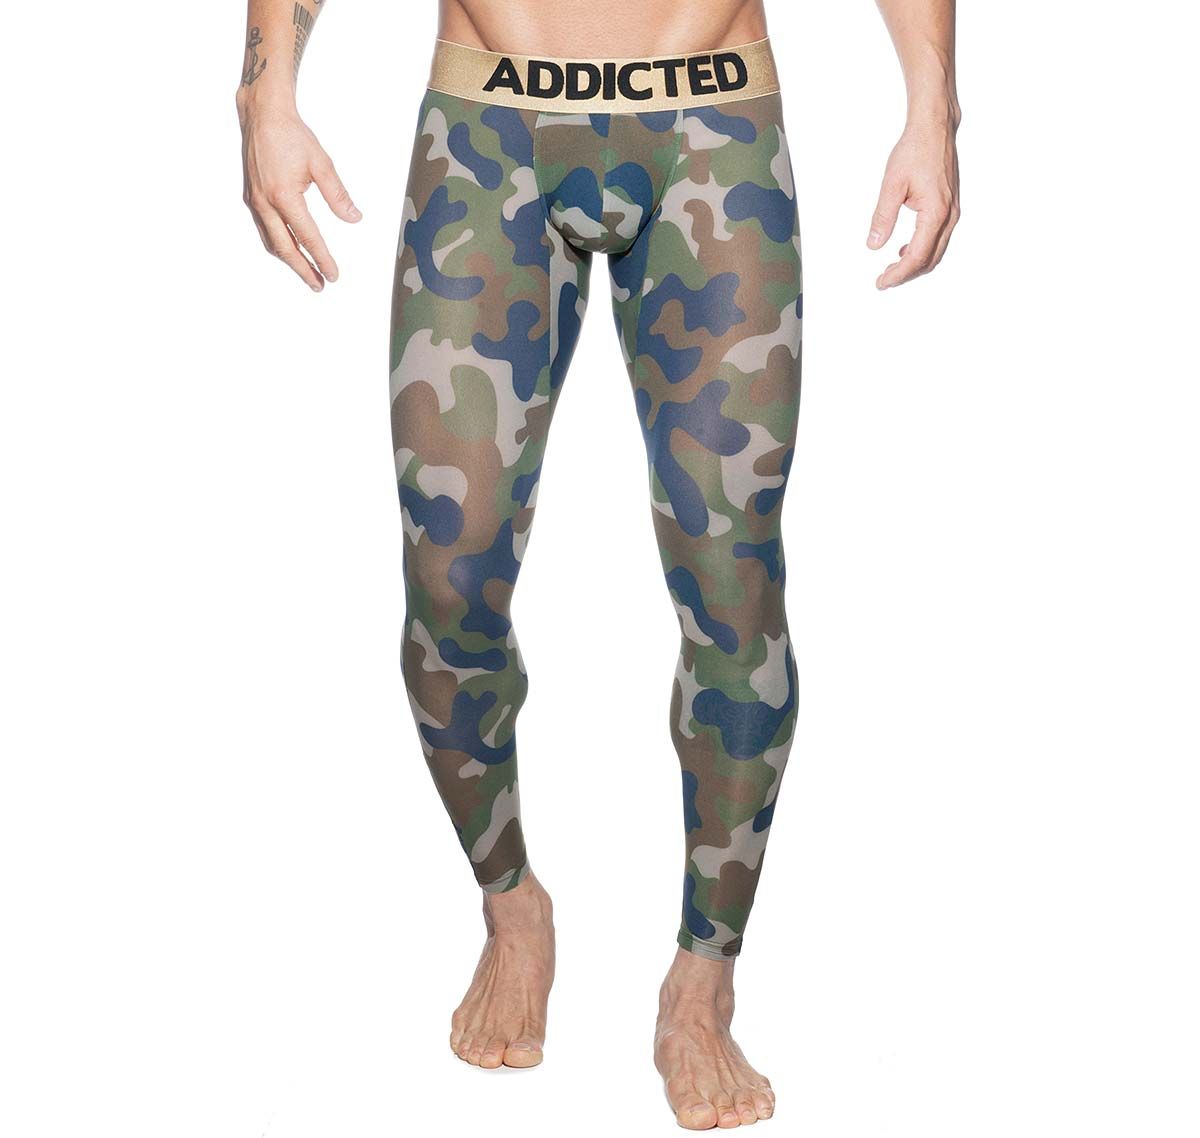 Addicted mutande lunghe BOTTOMLESS CAMO LONG JOHN AD695, camouflage